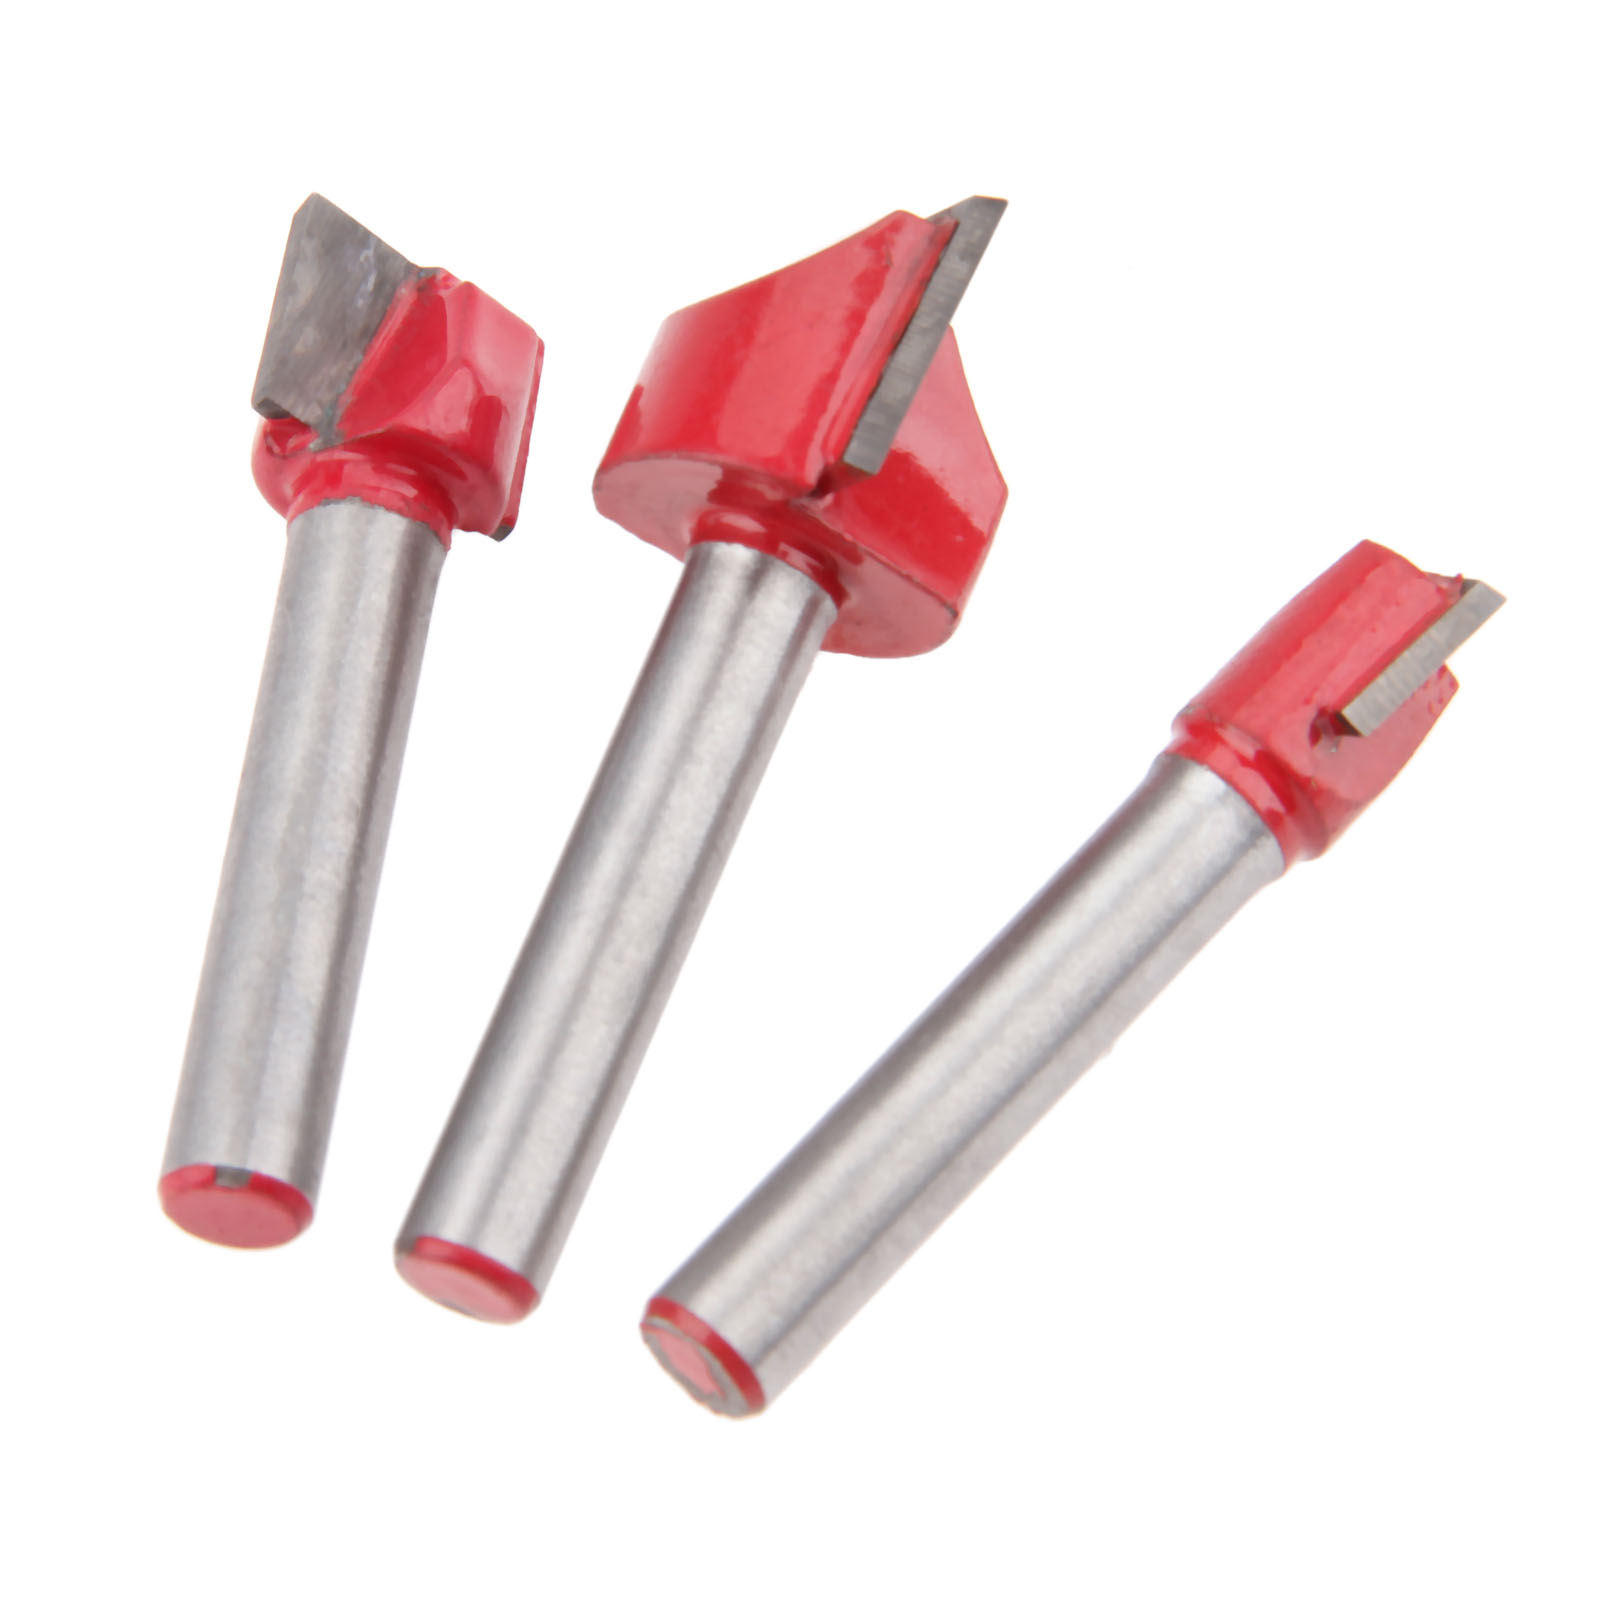 1Pc 6mm Shank Wood Cutter Cleaning Bottom Engraving Knife Router Bit 3D Woodworking Carbide Alloy Milling Cutter Carpentry Tools